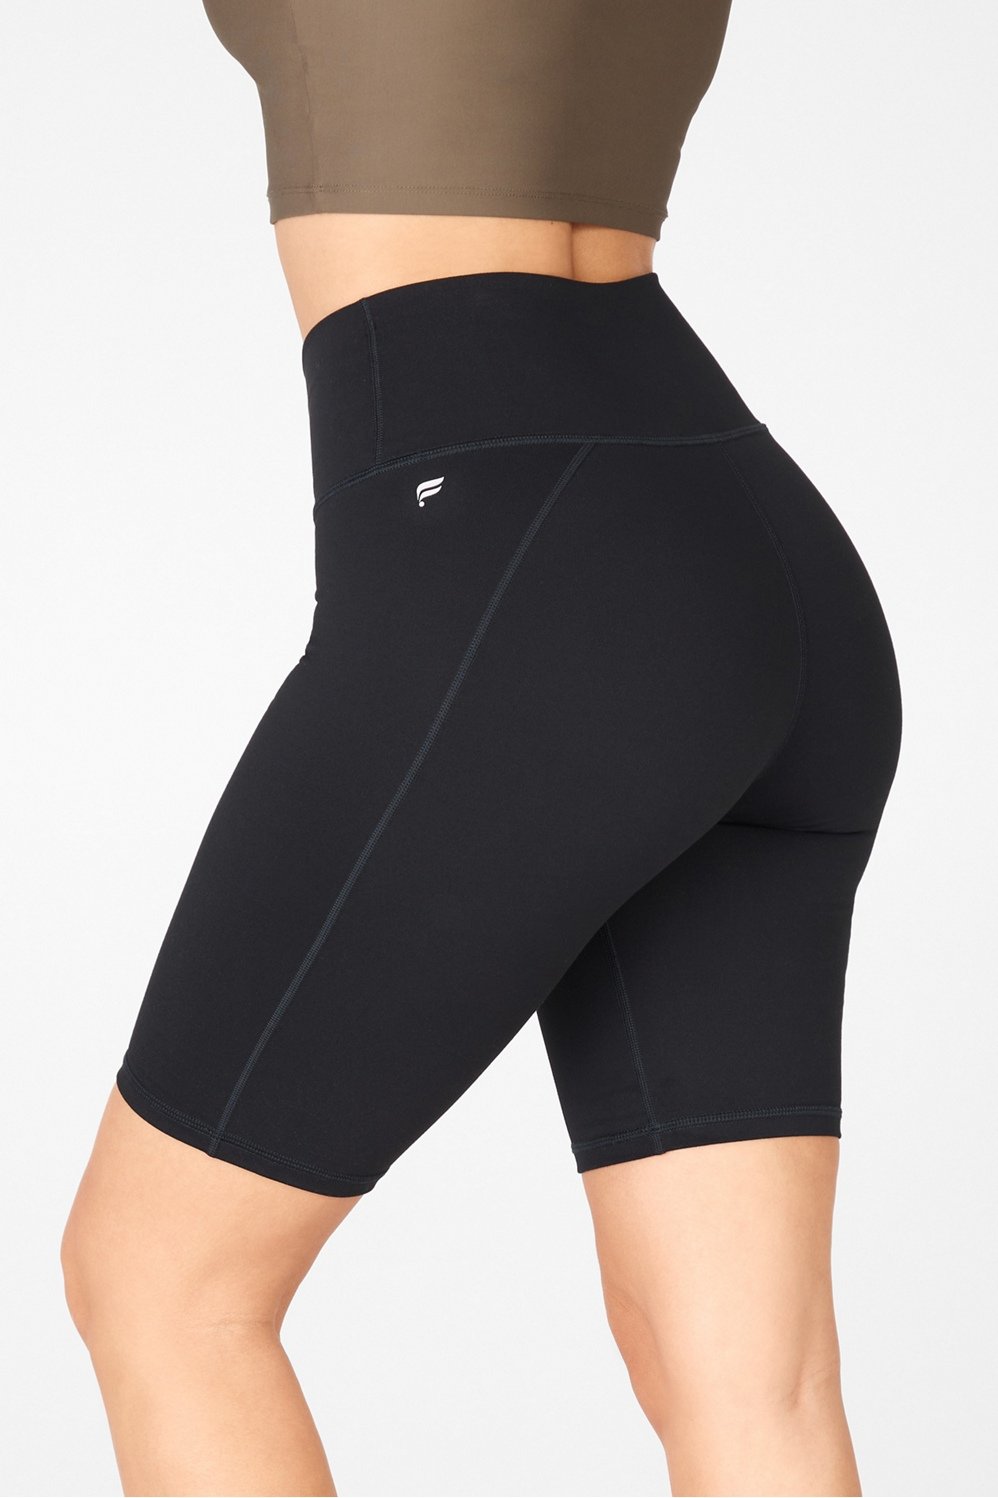 Replying to @Tortally_Ours Fabletics powerhold are some of my favorit, fabletics